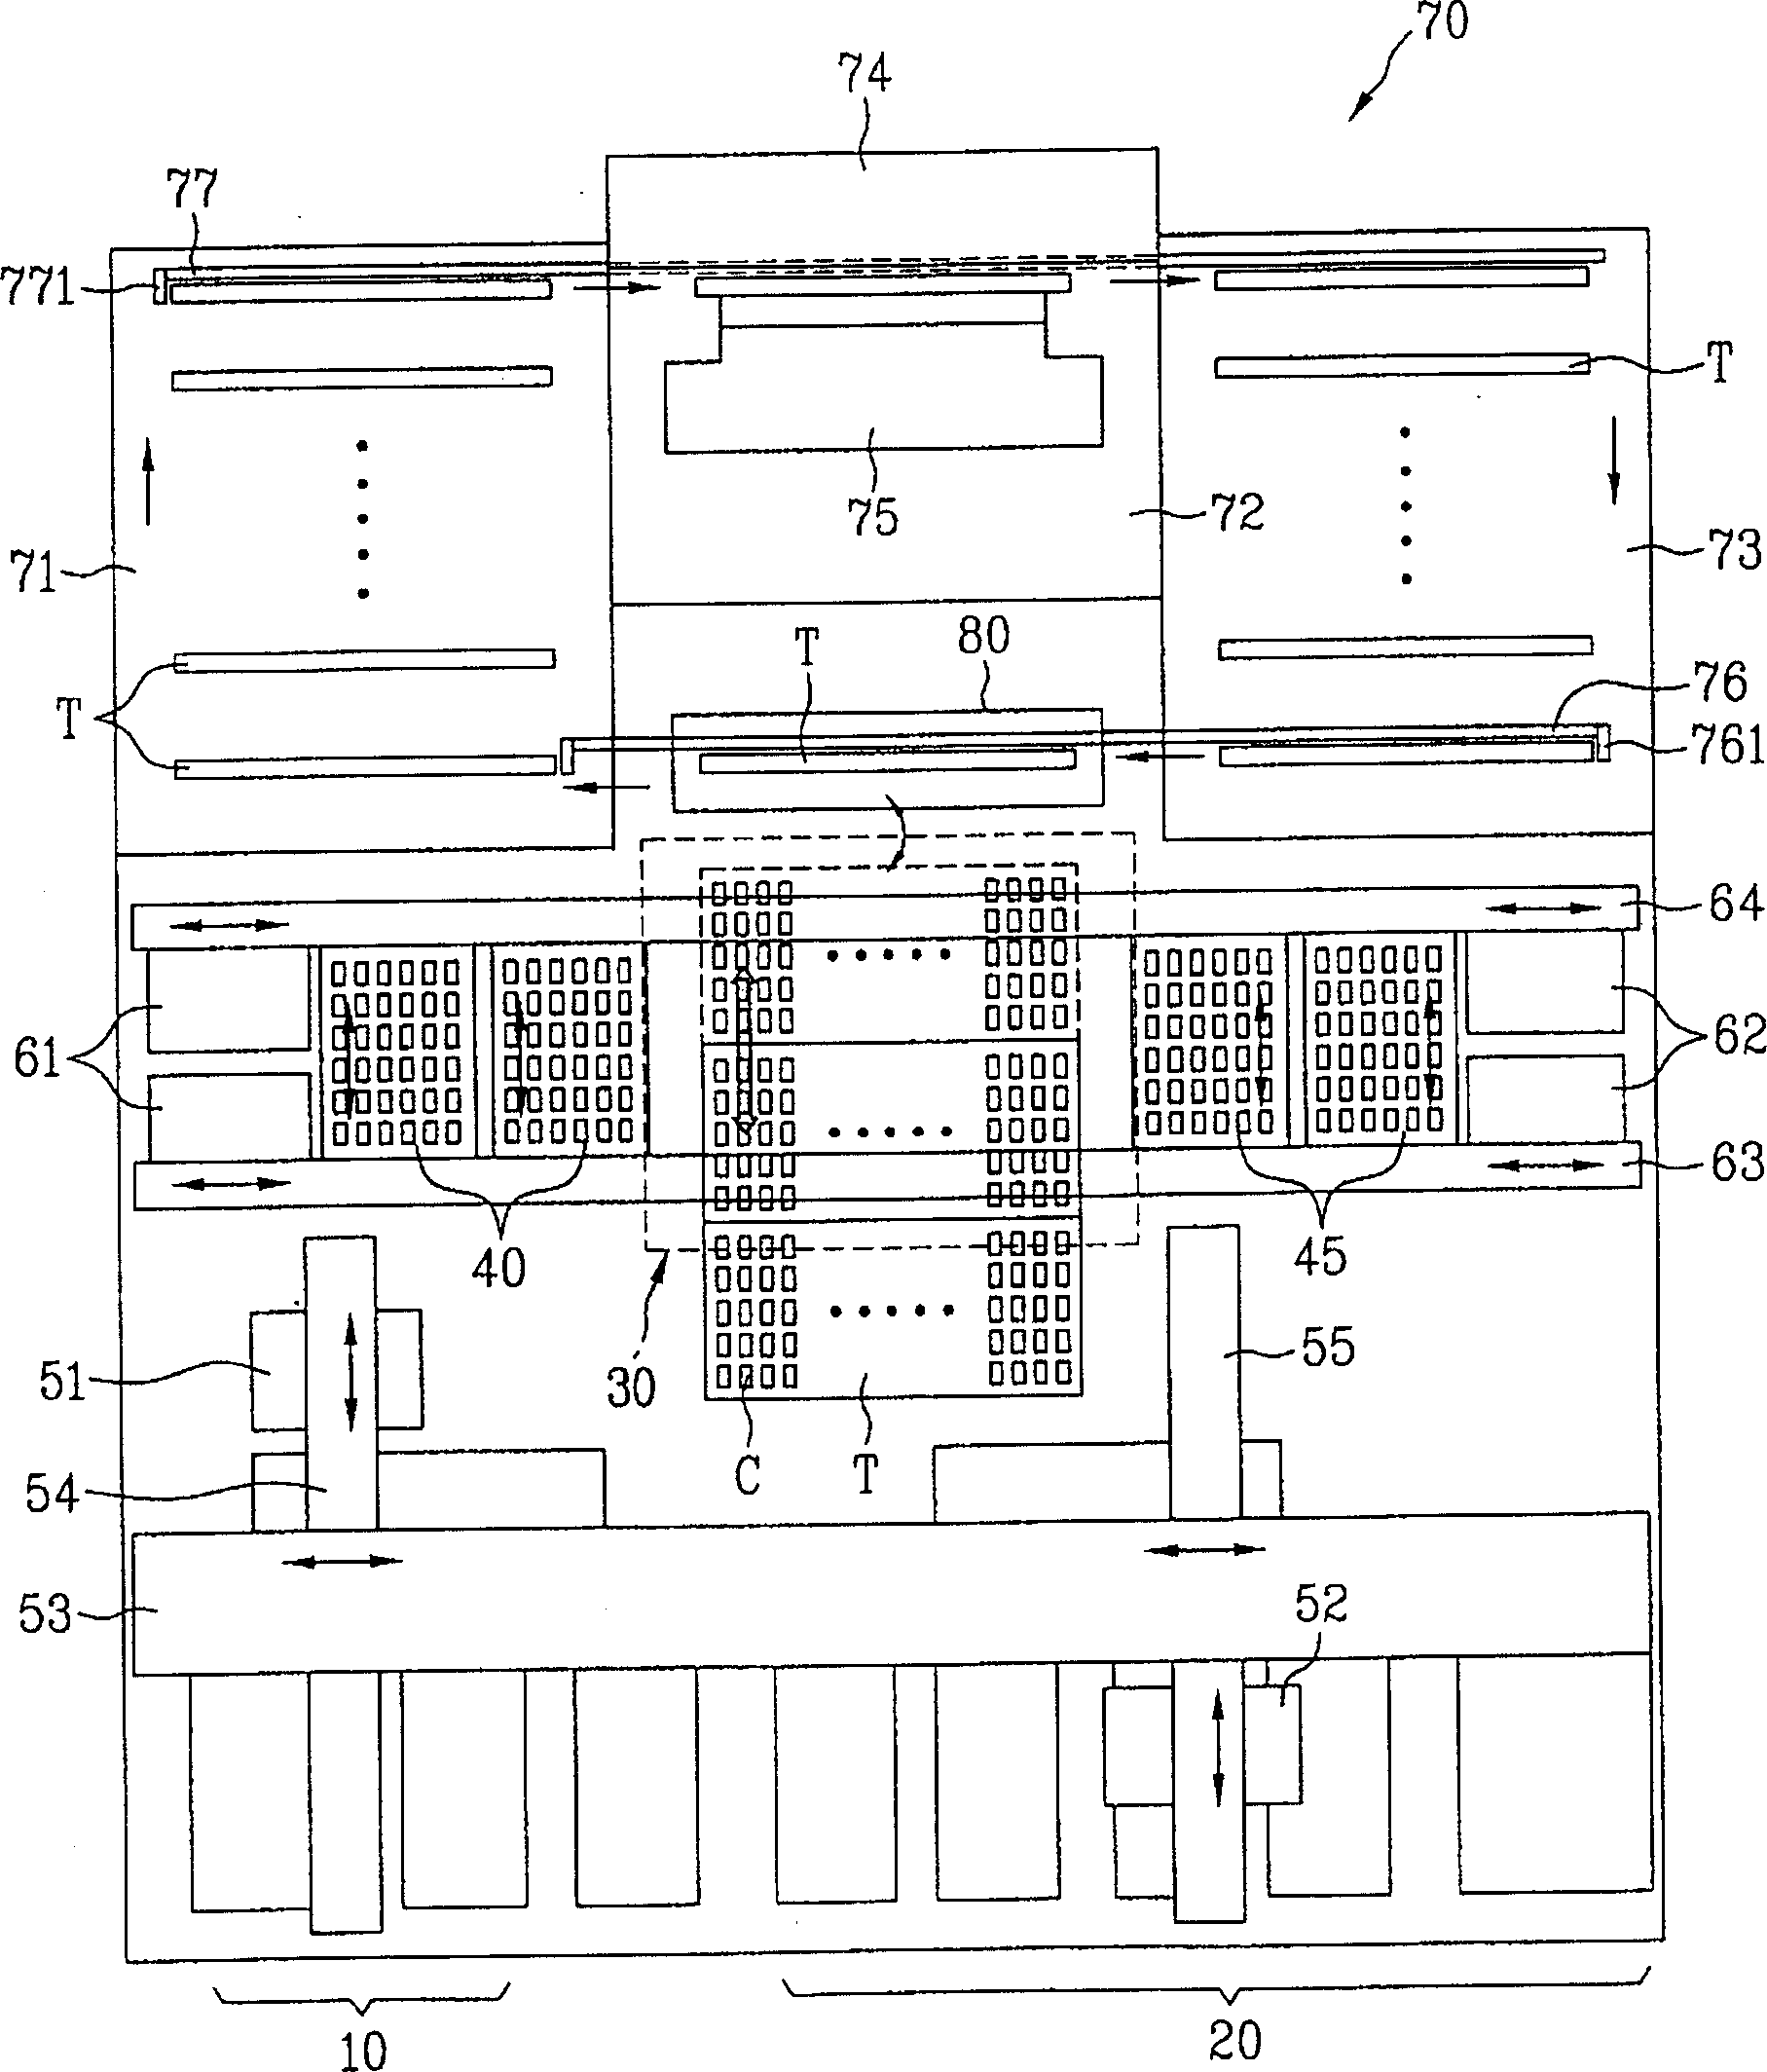 Handler for testing semiconductor devices